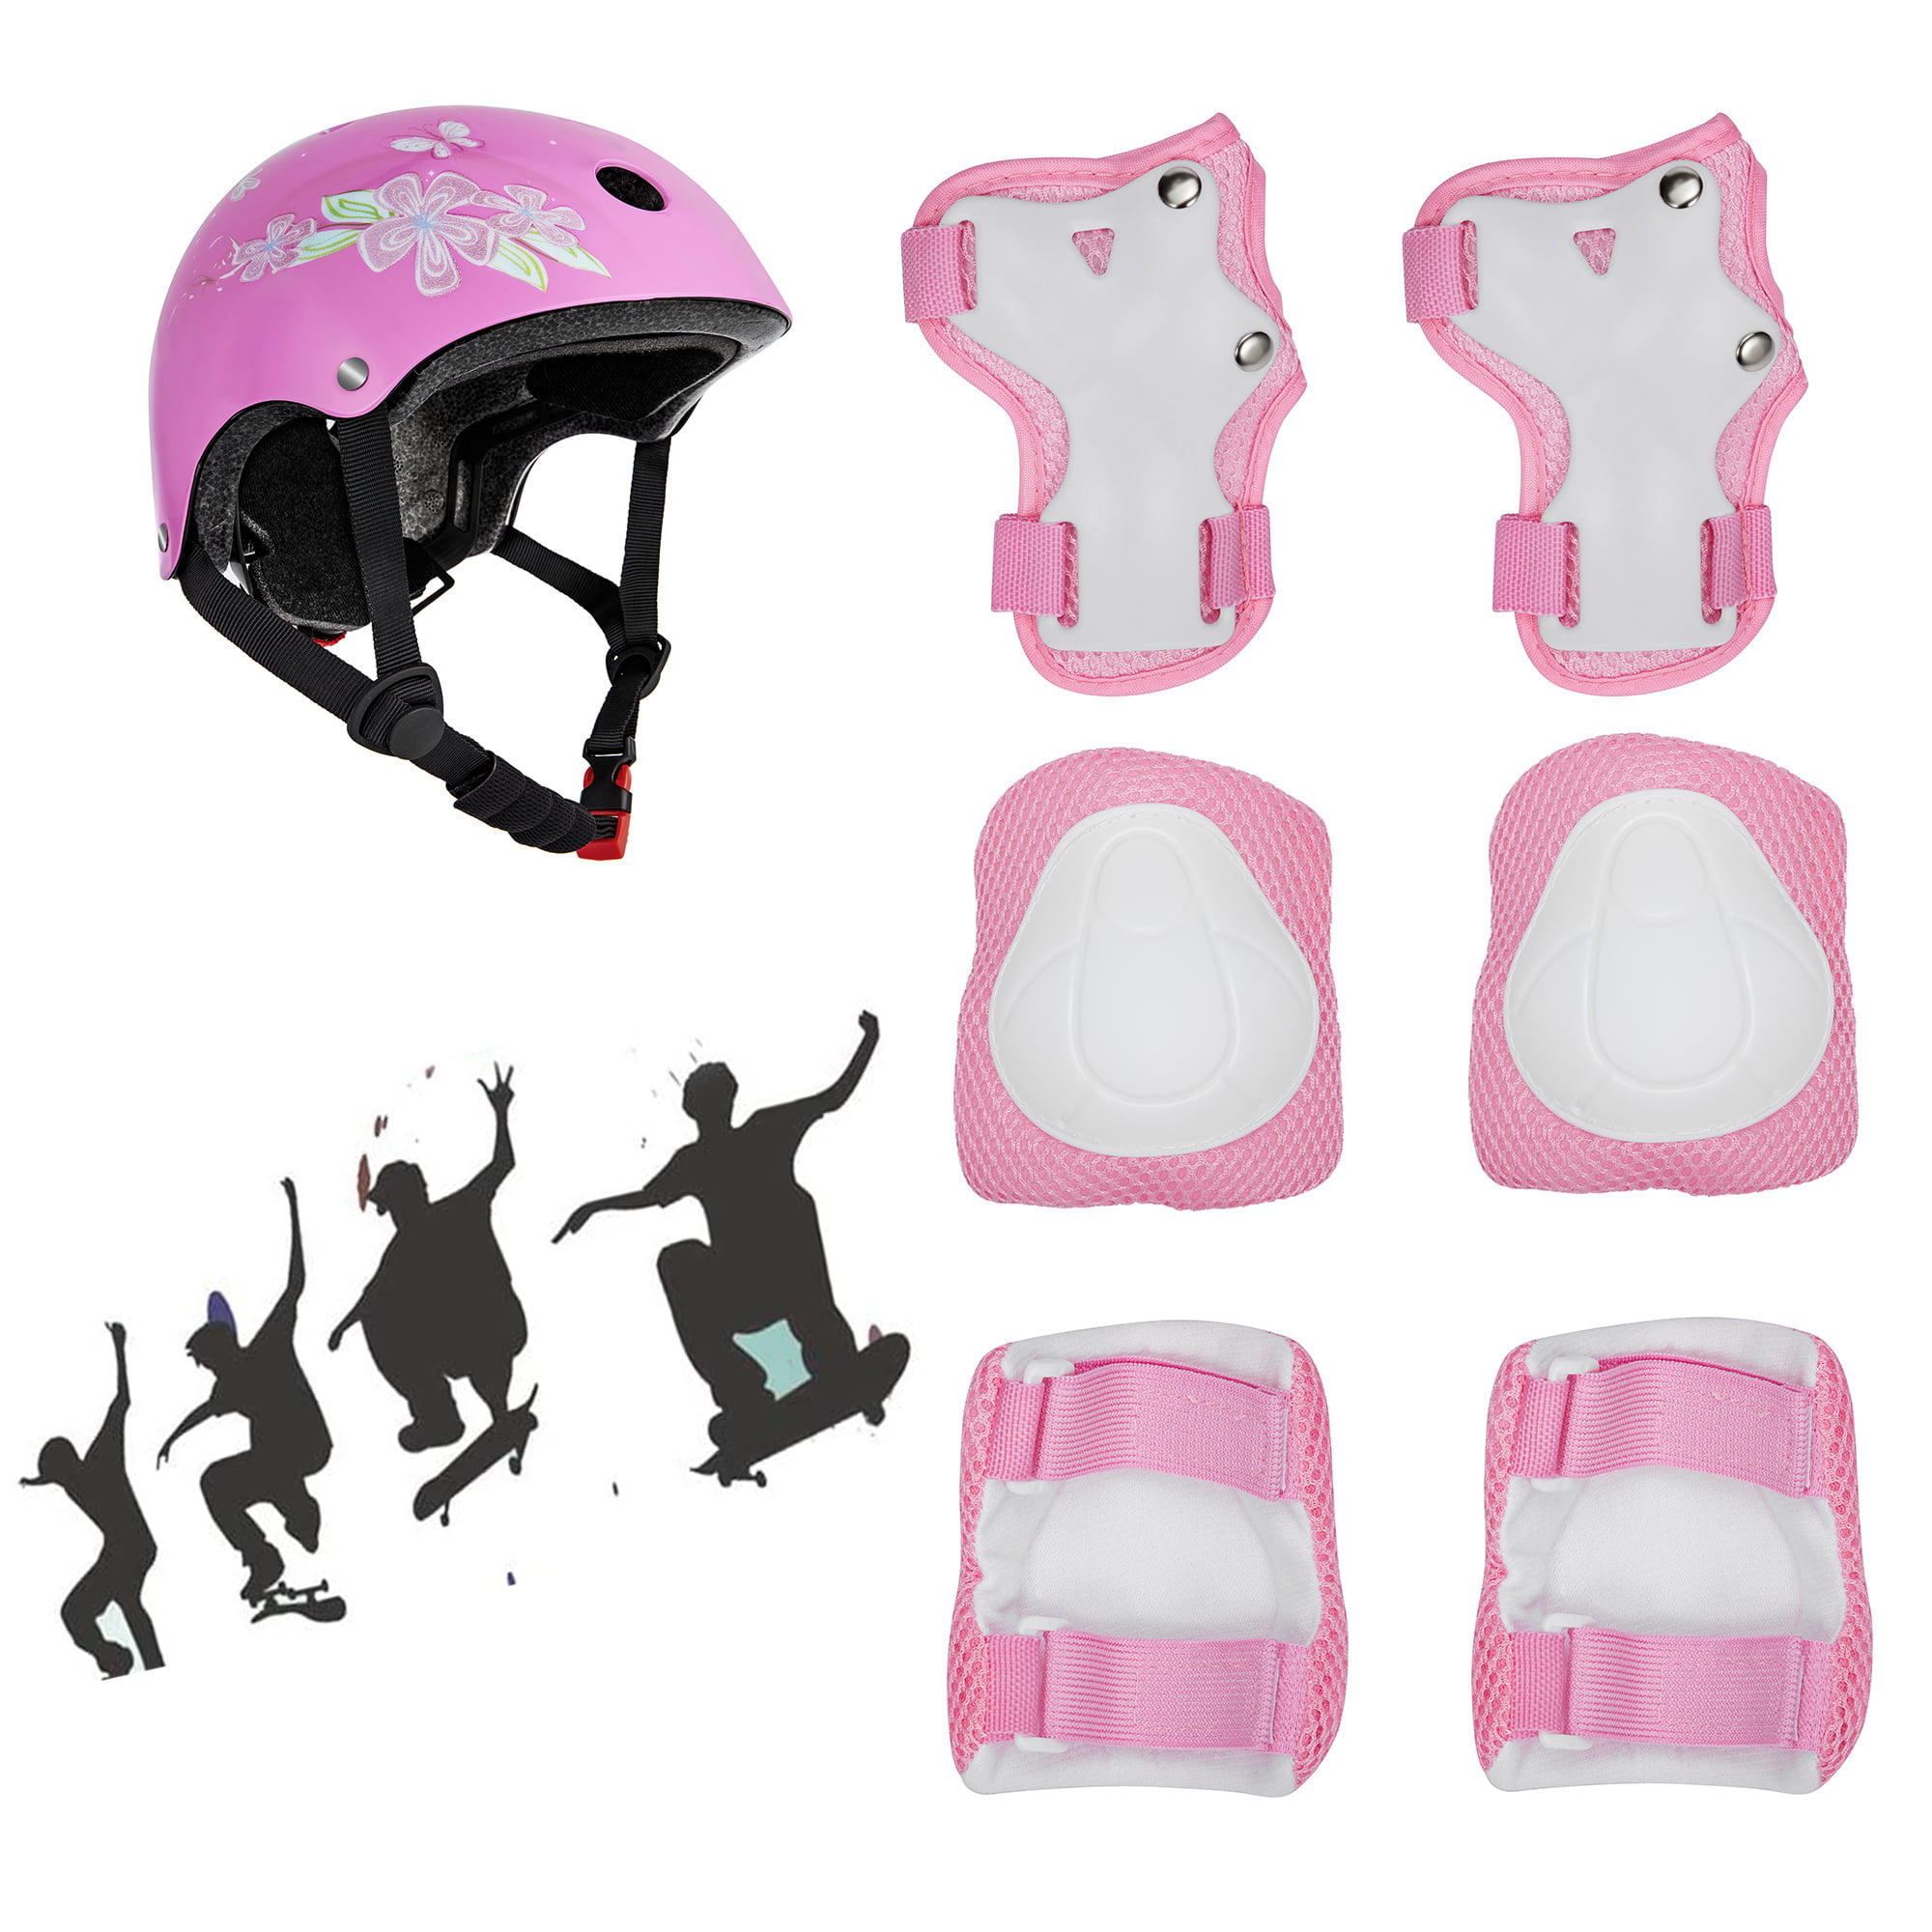 Lucky Kids Protective Gear Set Boys Girls Adjustable Size Helmet with Knee Pads Elbow Pads Wrist Guards for Skateboard Cycling Hoverboard Scooter Rollerblading 